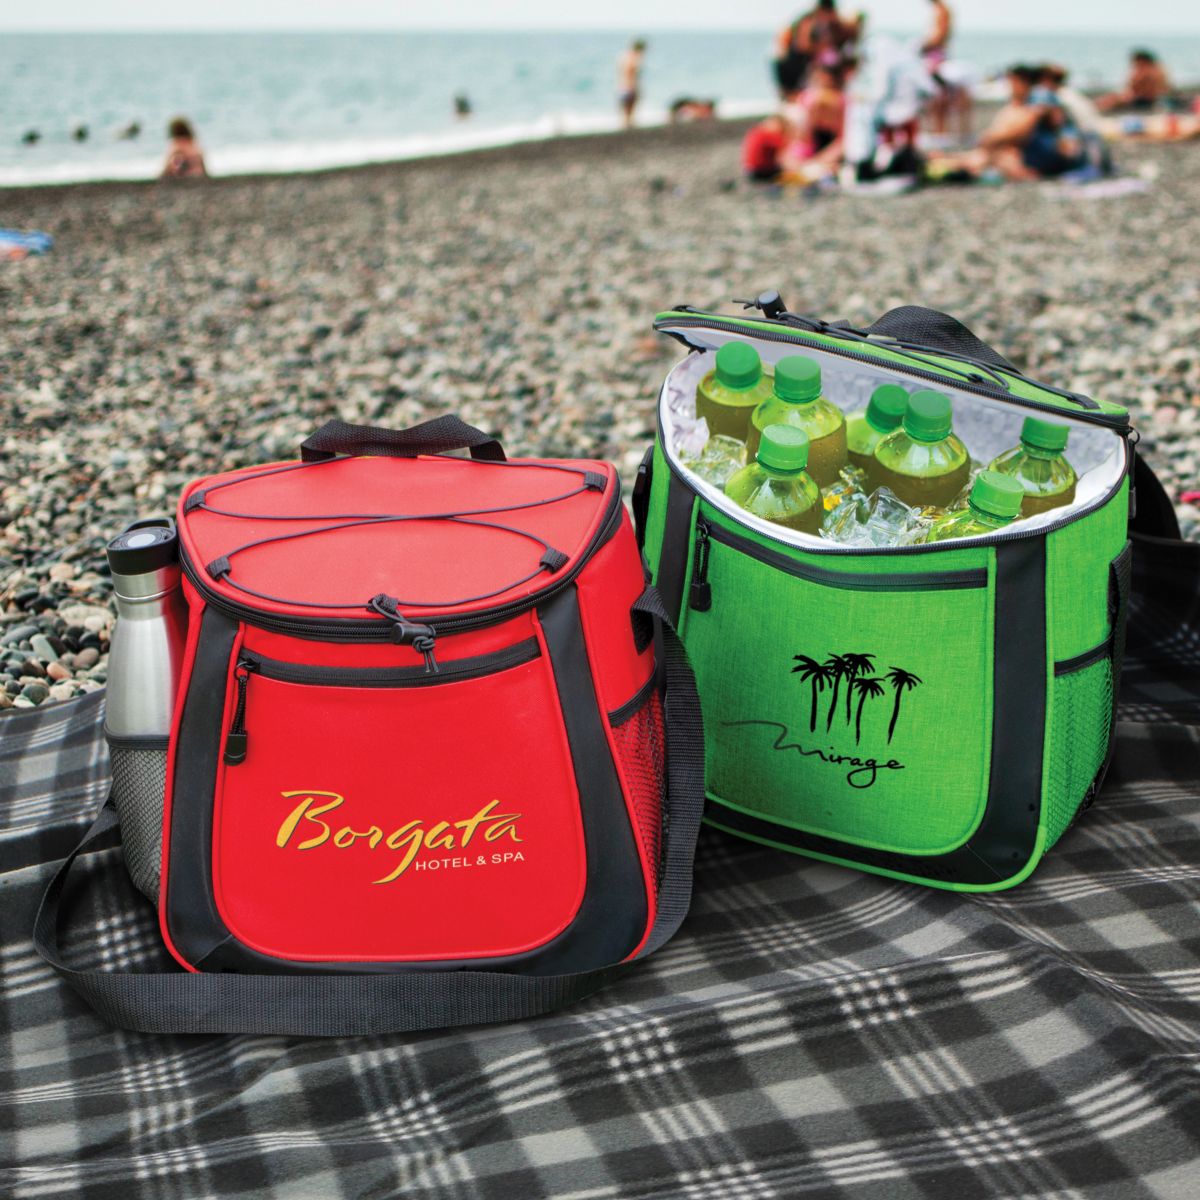 Image of branded cooler bags by the water